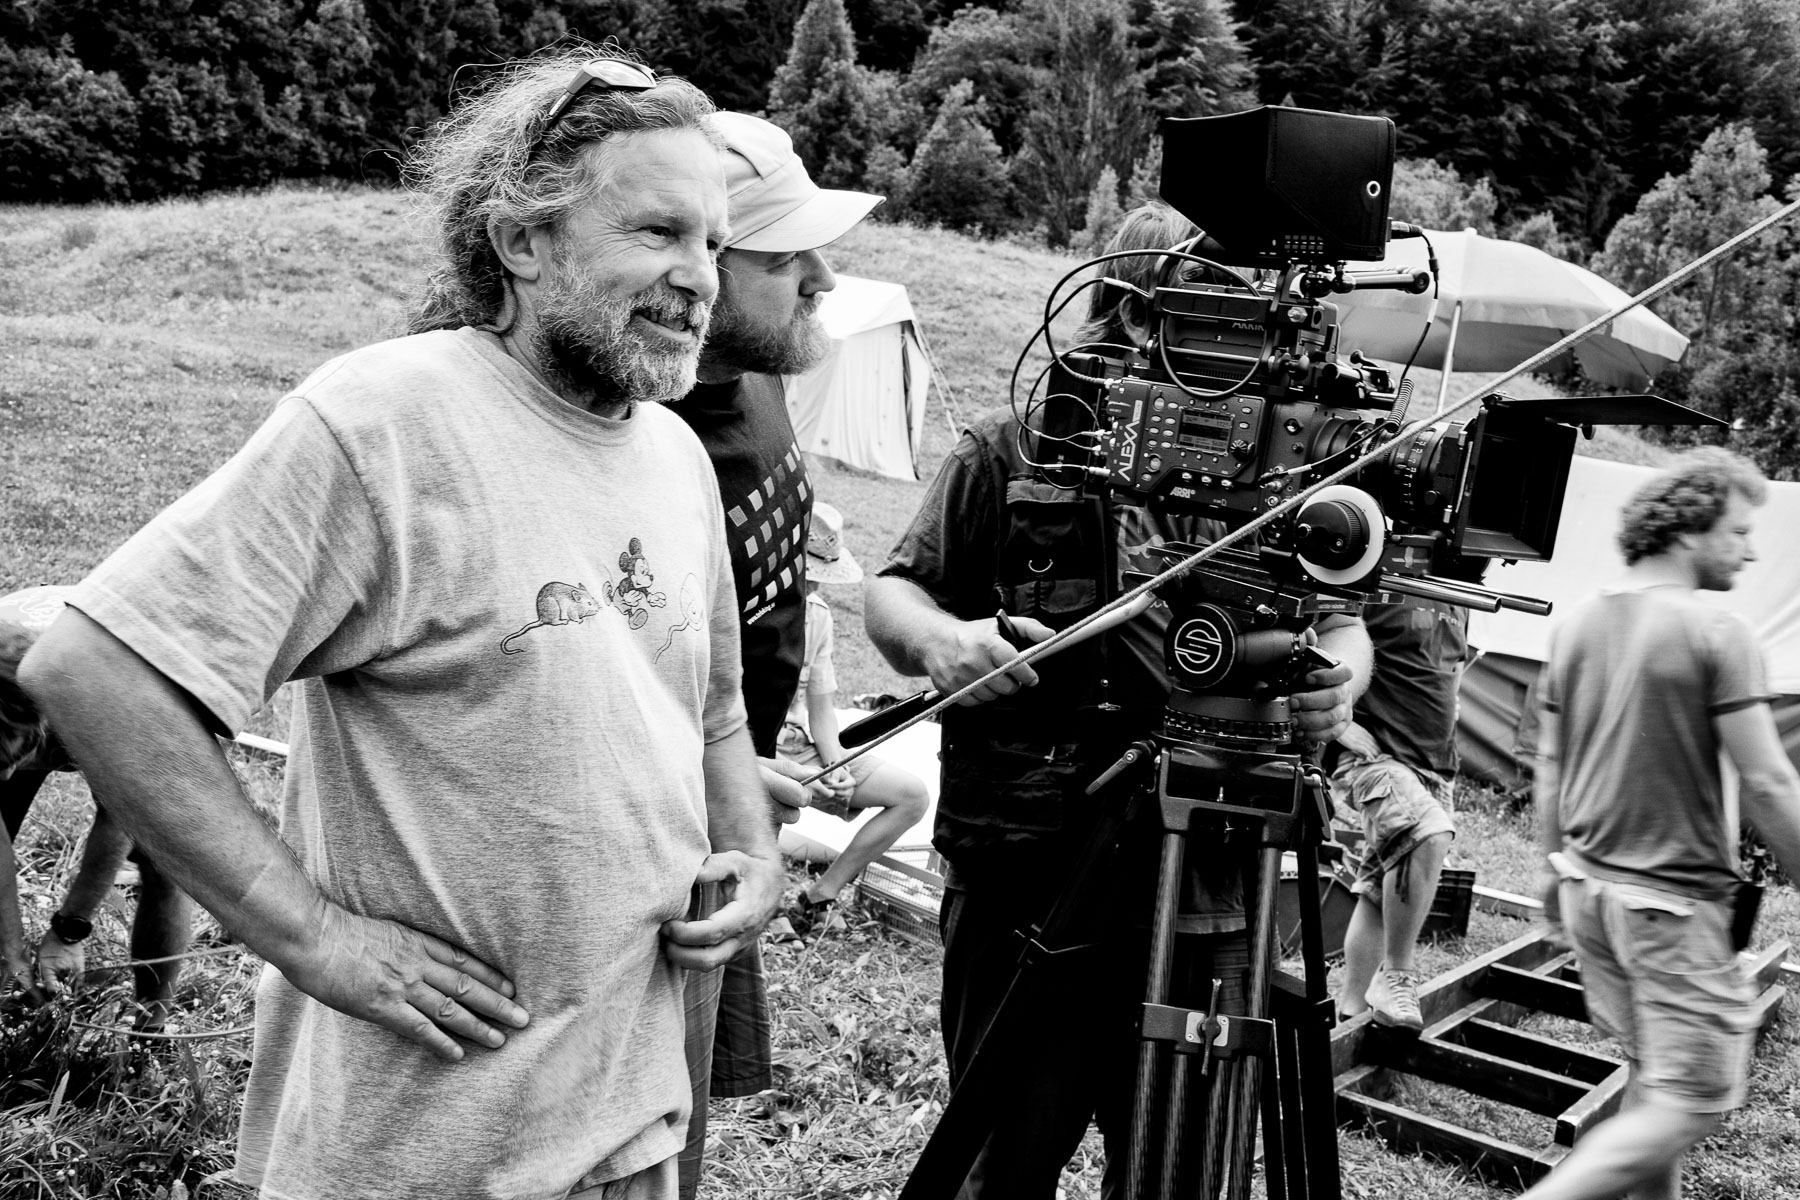 Director Miha Hočevar on the set of Going Our Way 2.